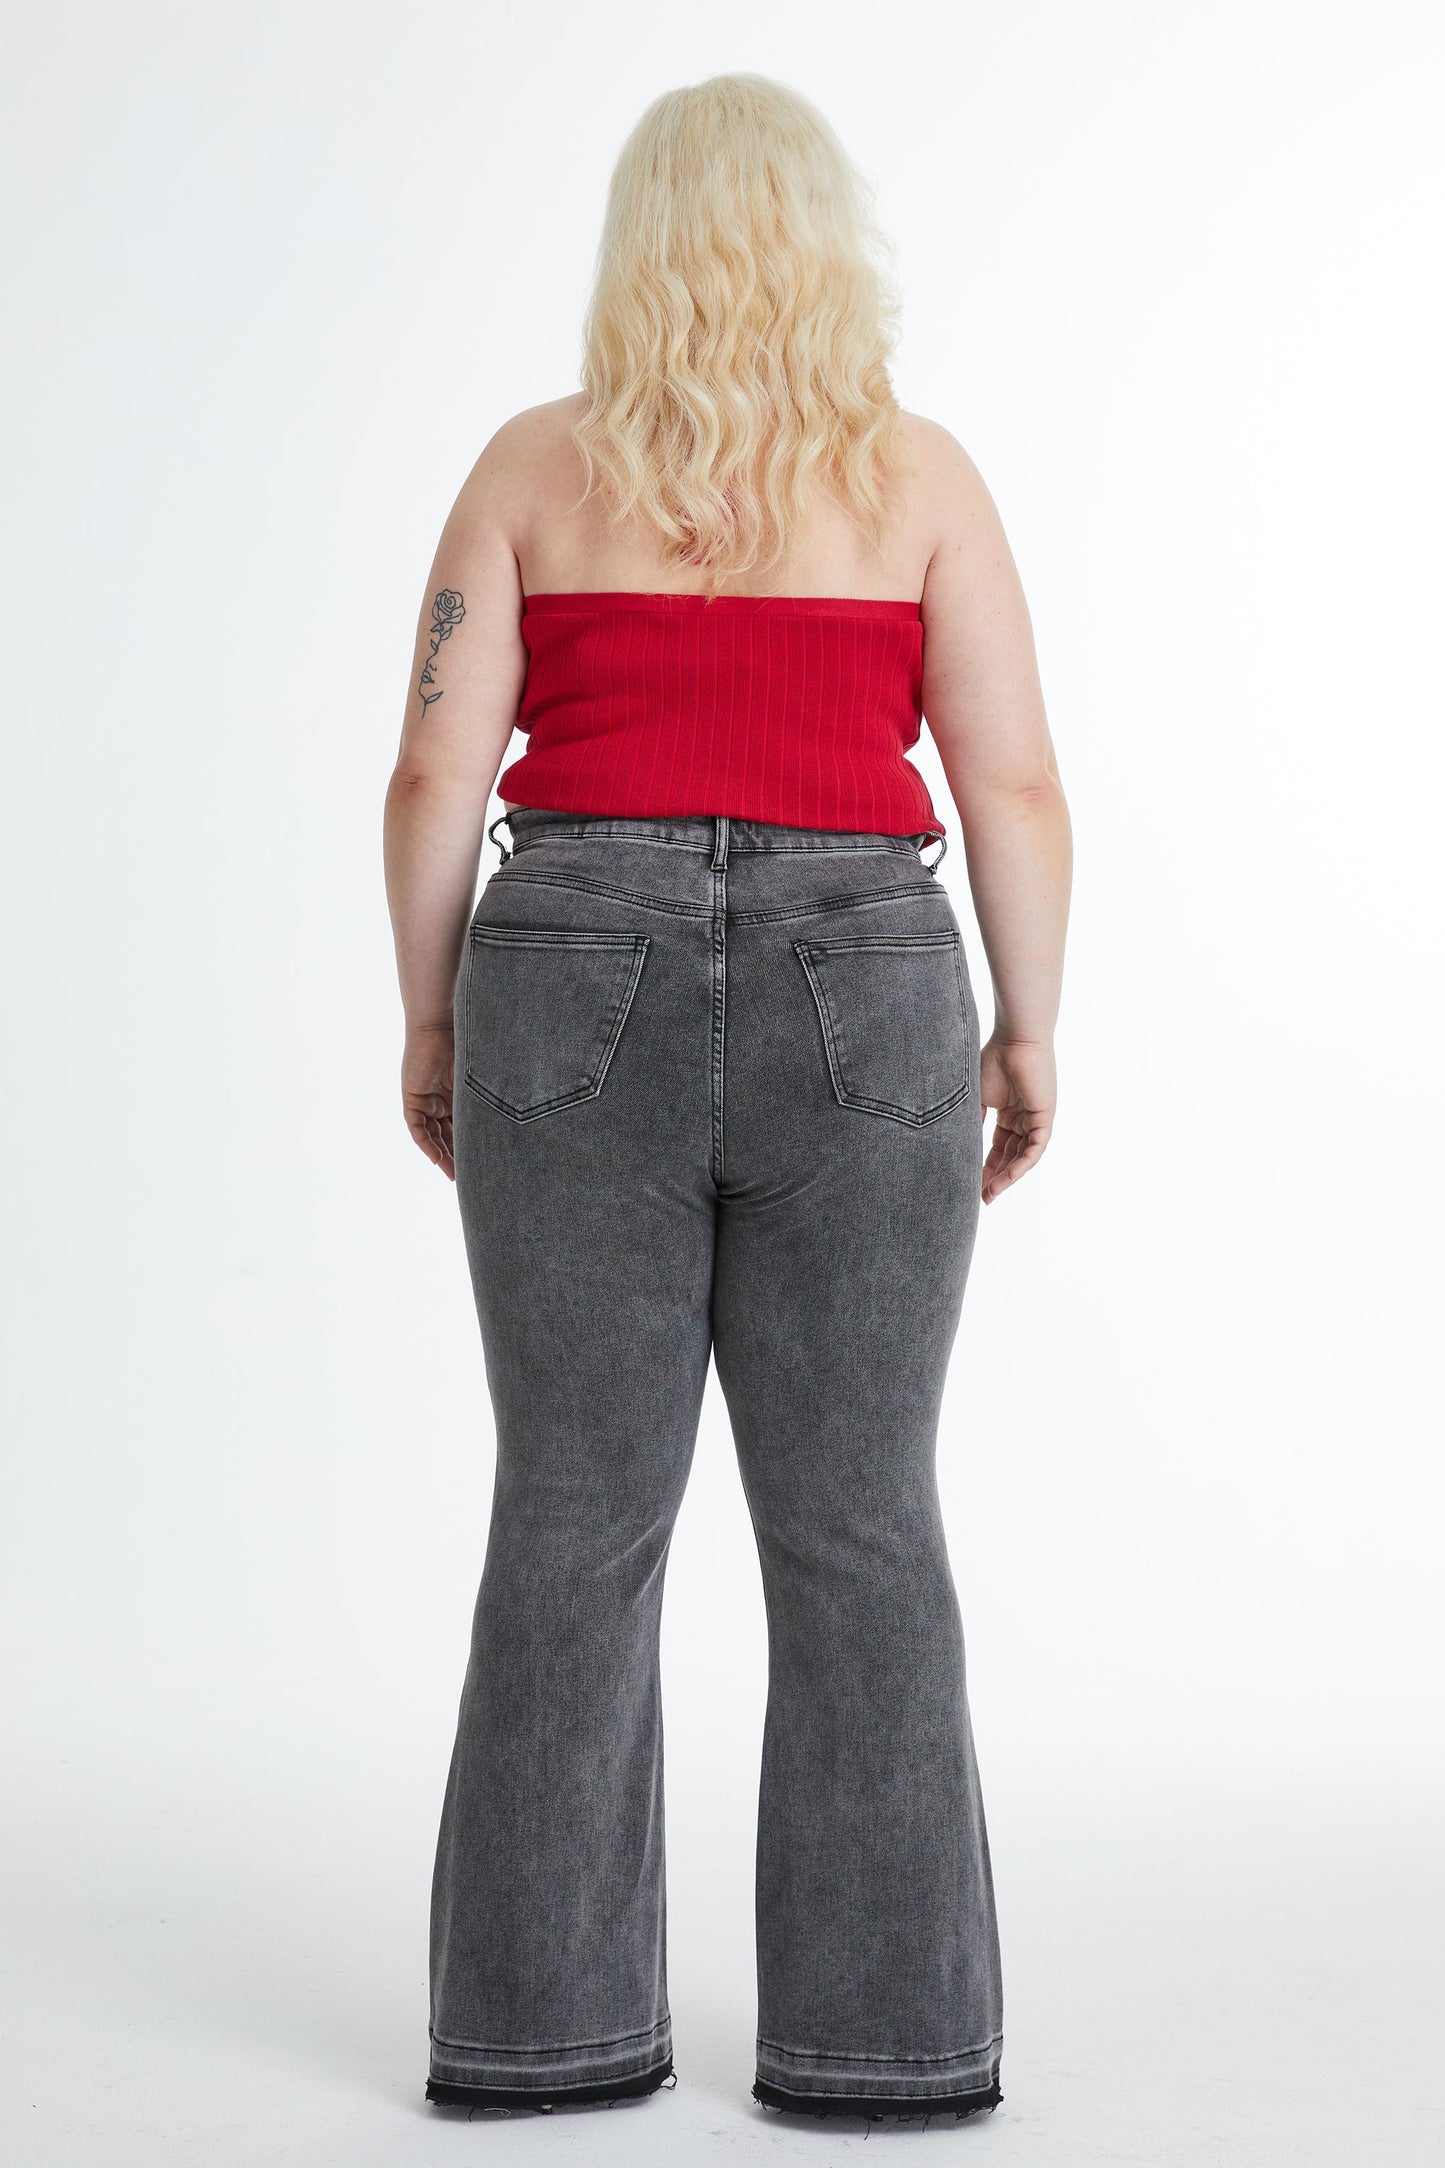 LAUREN HIGH RISE FLARE JEANS WITH RAW HEM BYF1129-P (BYHE055-P) HEATHER GRAY PLUS SIZE